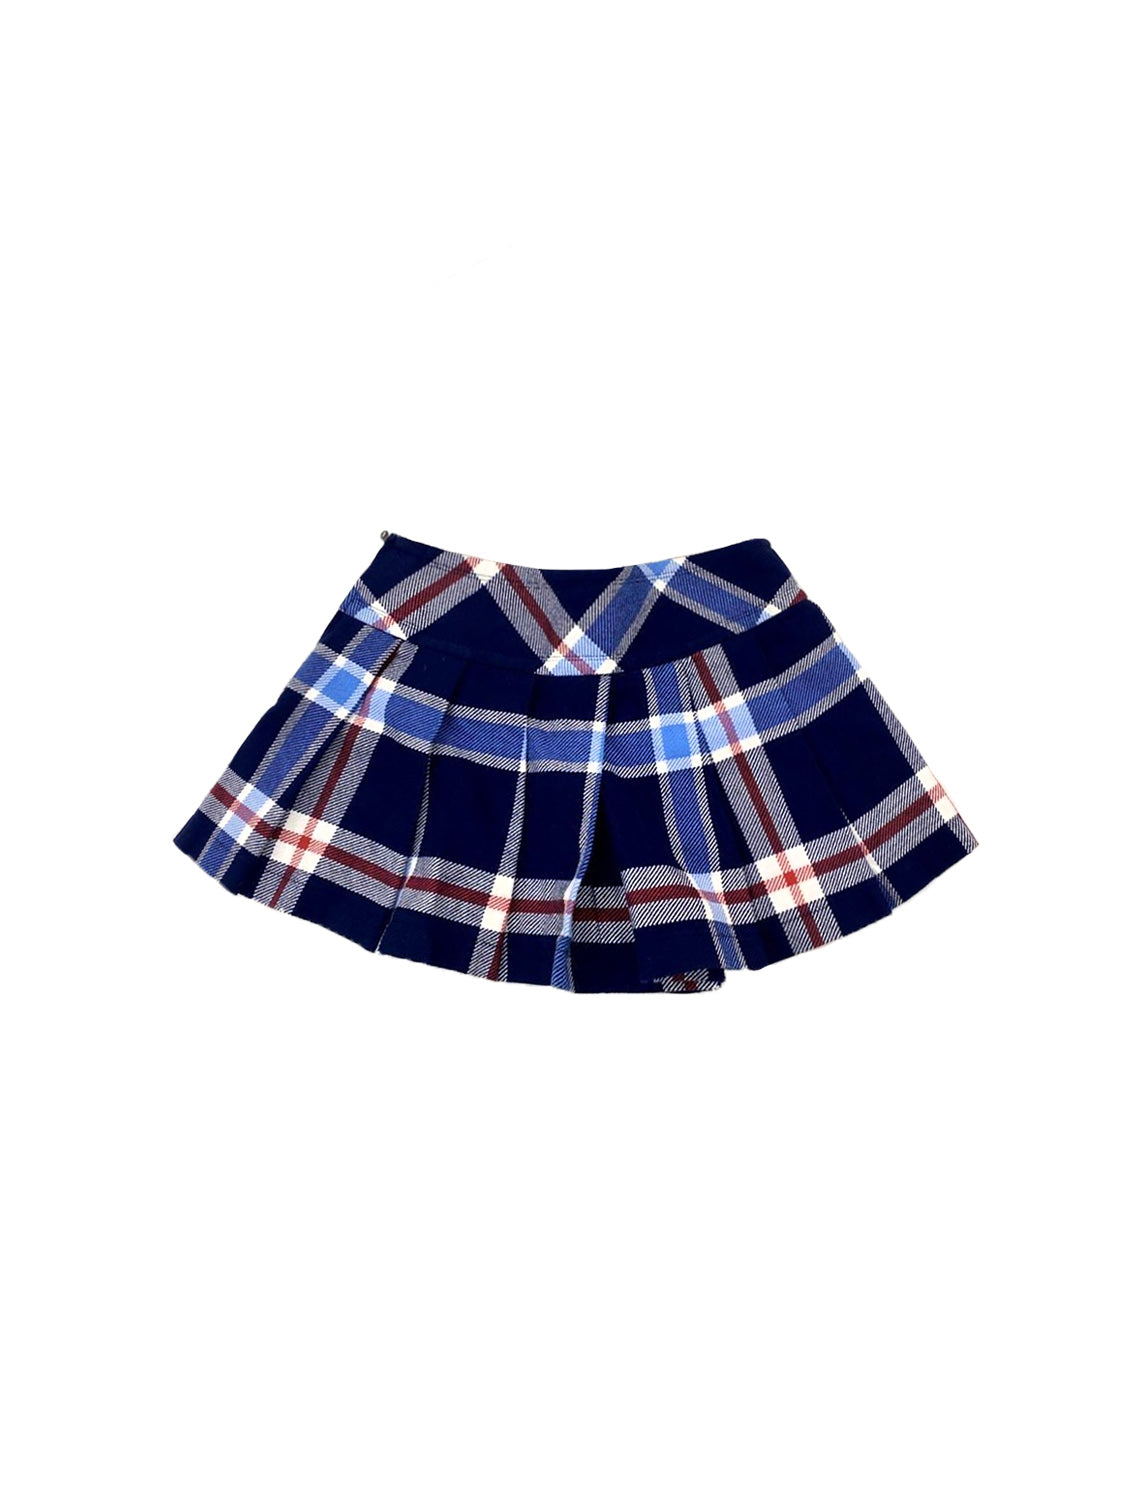 Burberry 2000s Blue Label  Pleated Check Buckled Skirt